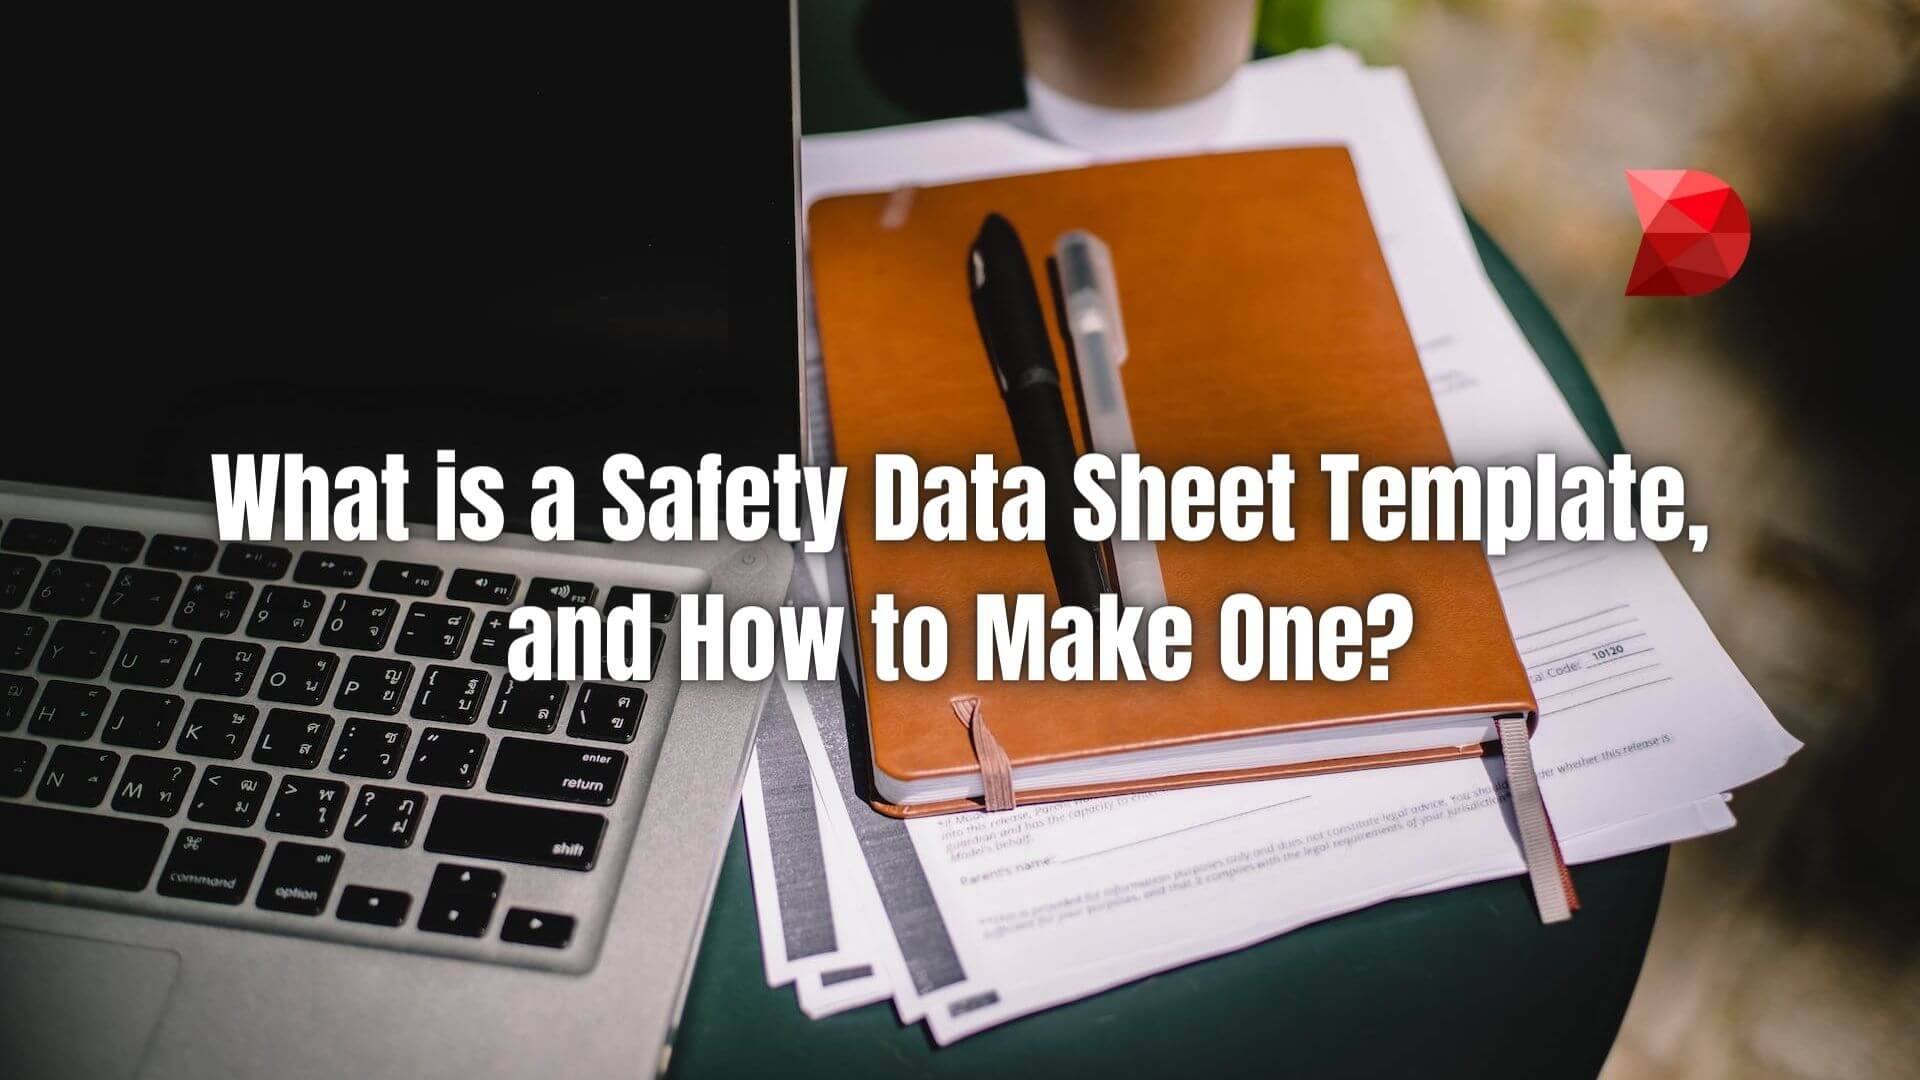 Stay compliant and prioritize safety effortlessly. Click here to unlock the secrets to creating a robust Safety Data Sheet Template.